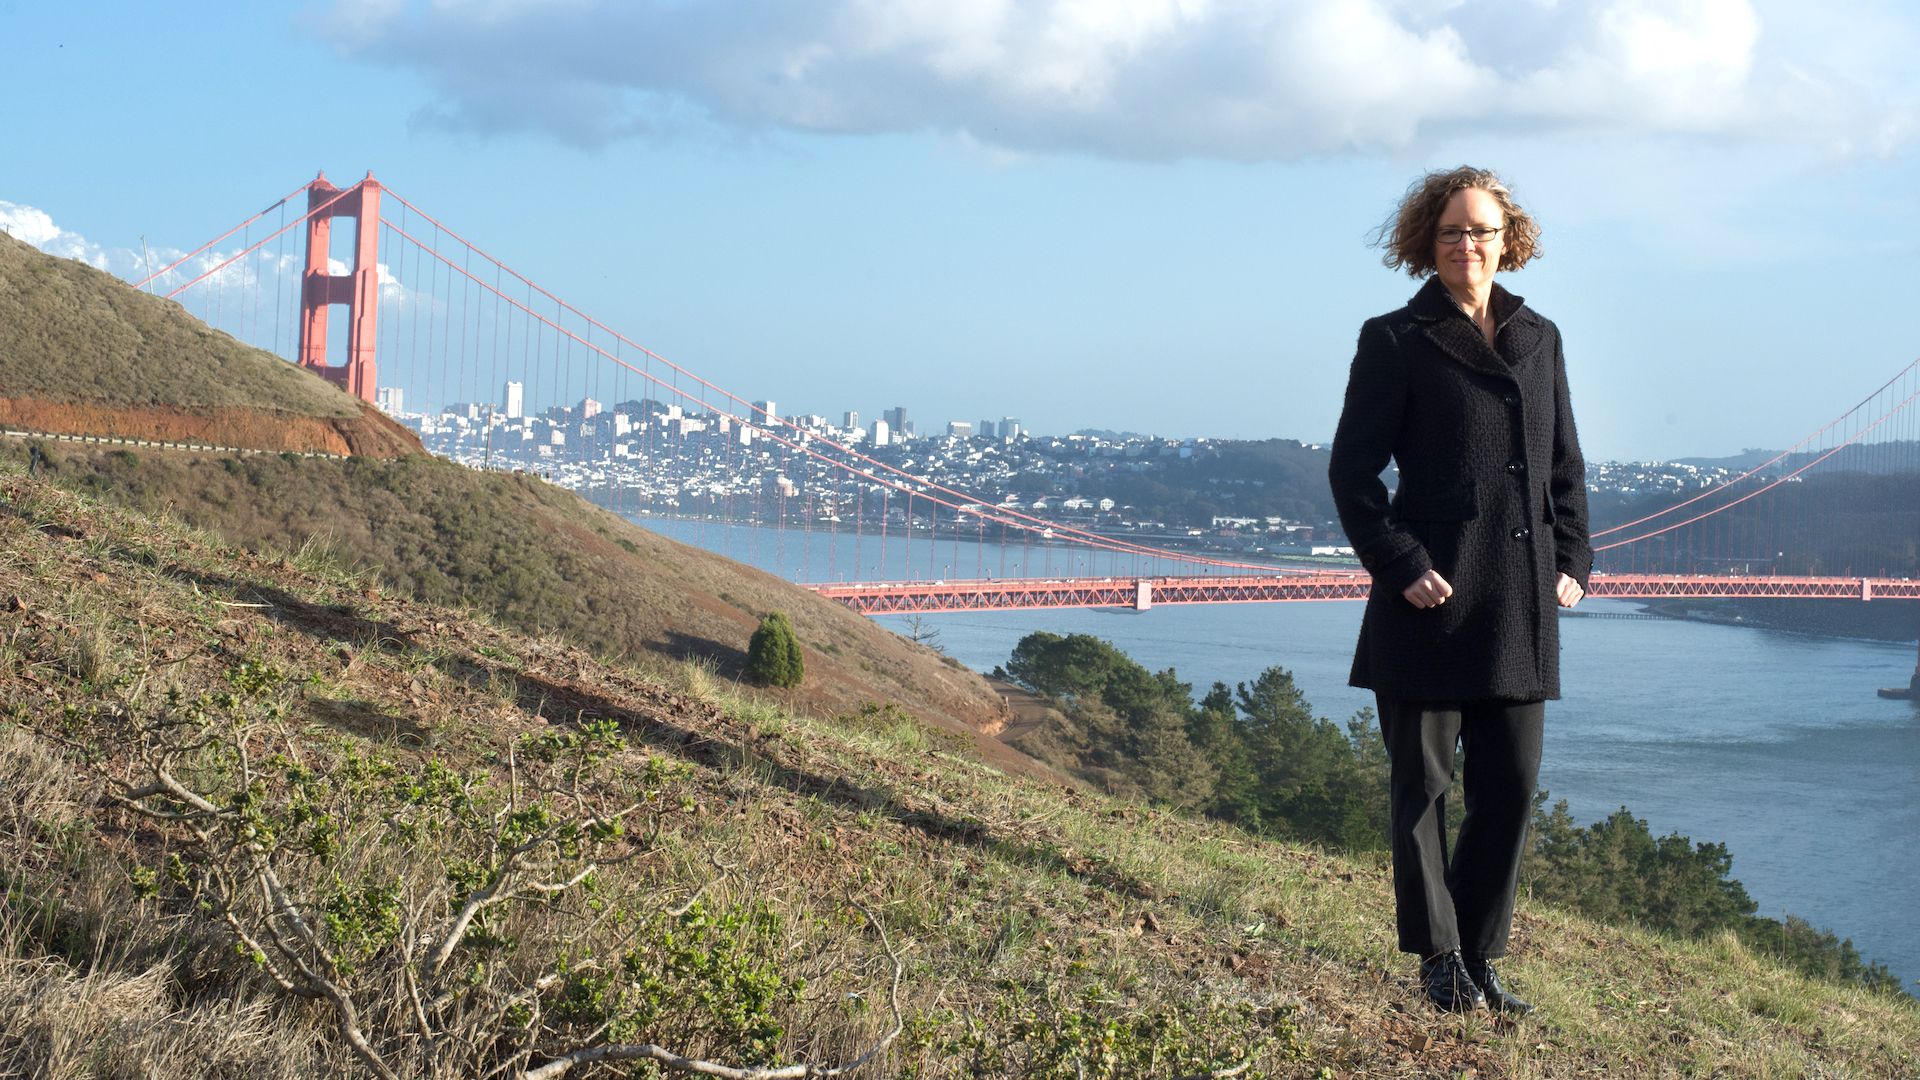 Indi Young standing on a hill with the Golden Gate Bridge in the background